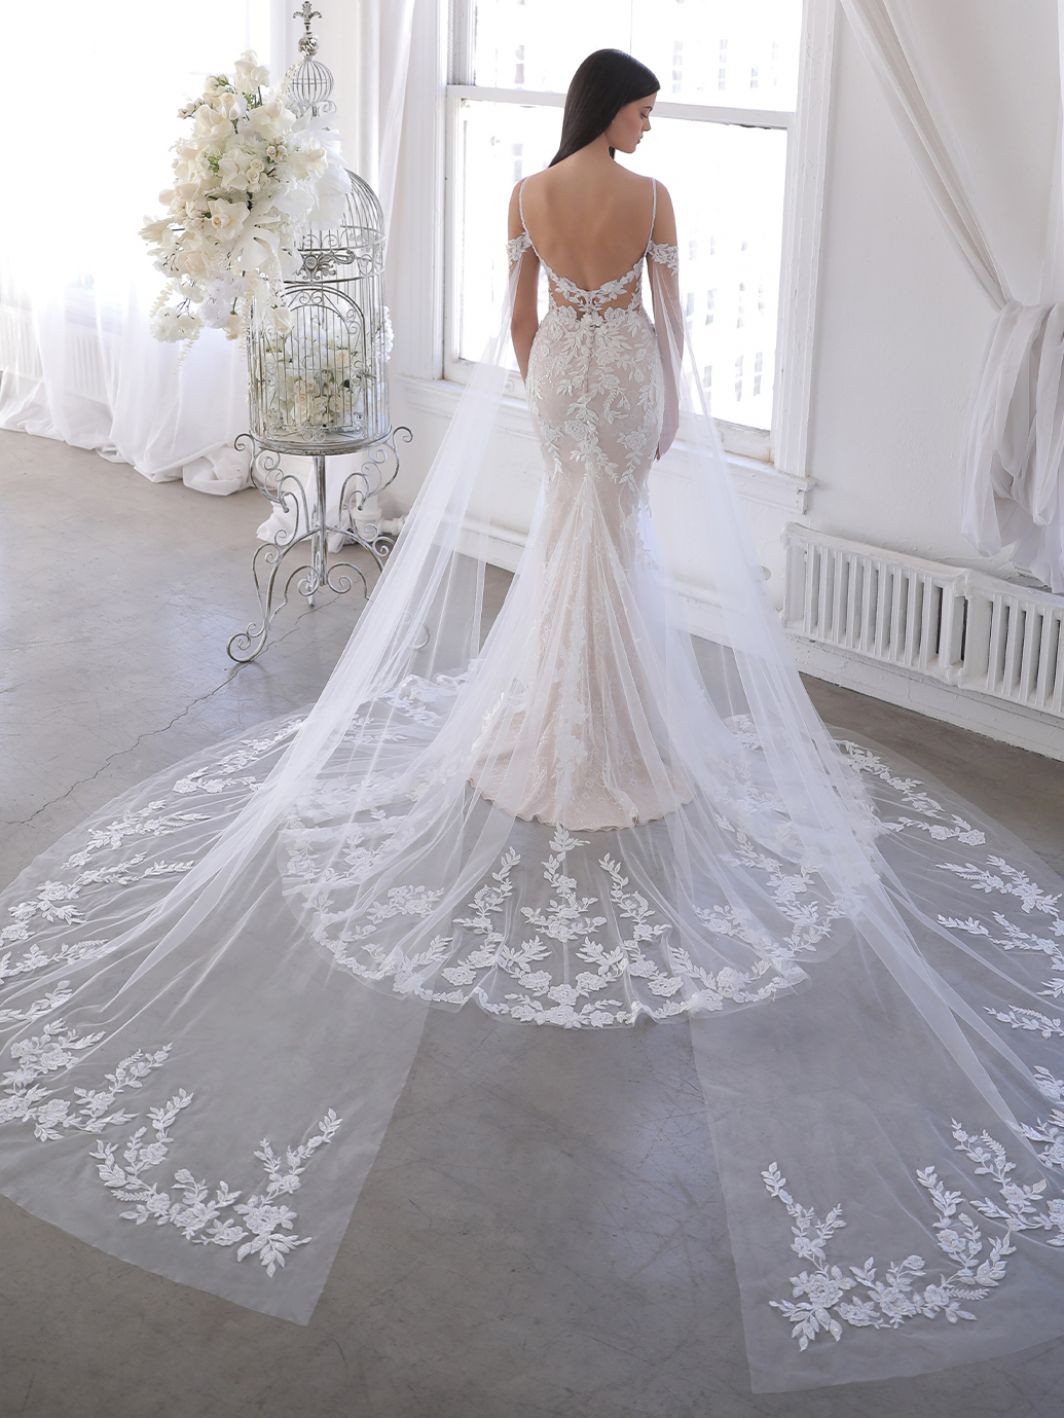 Olana Bridal Dress Inspirated By Blue By Enzoani 2022 of Enzoani